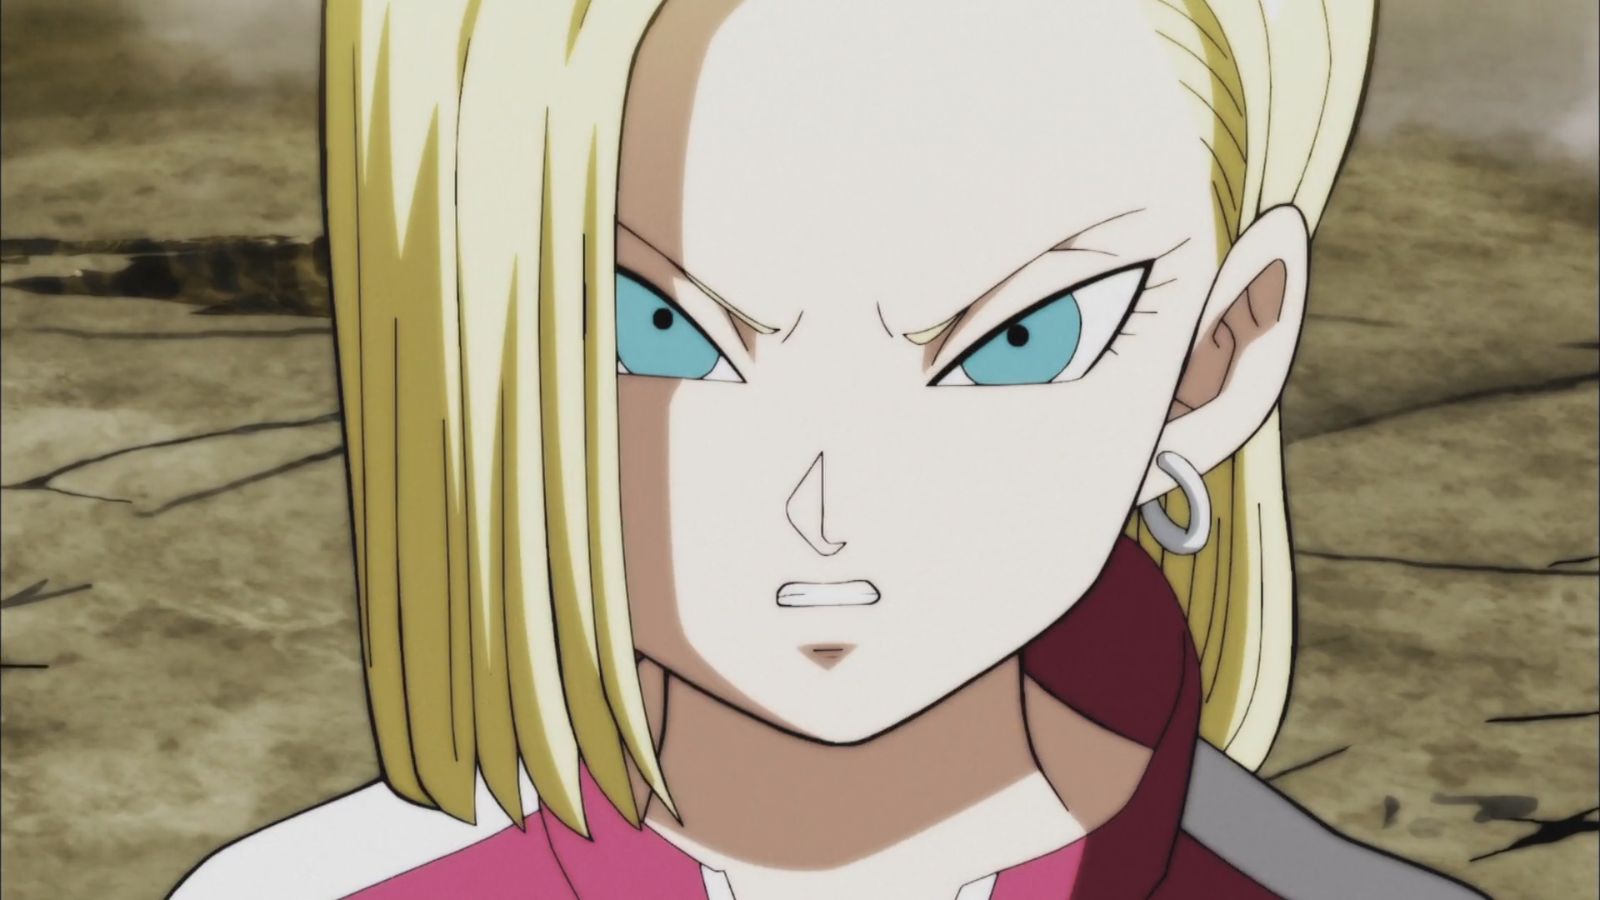 Android 18 smile